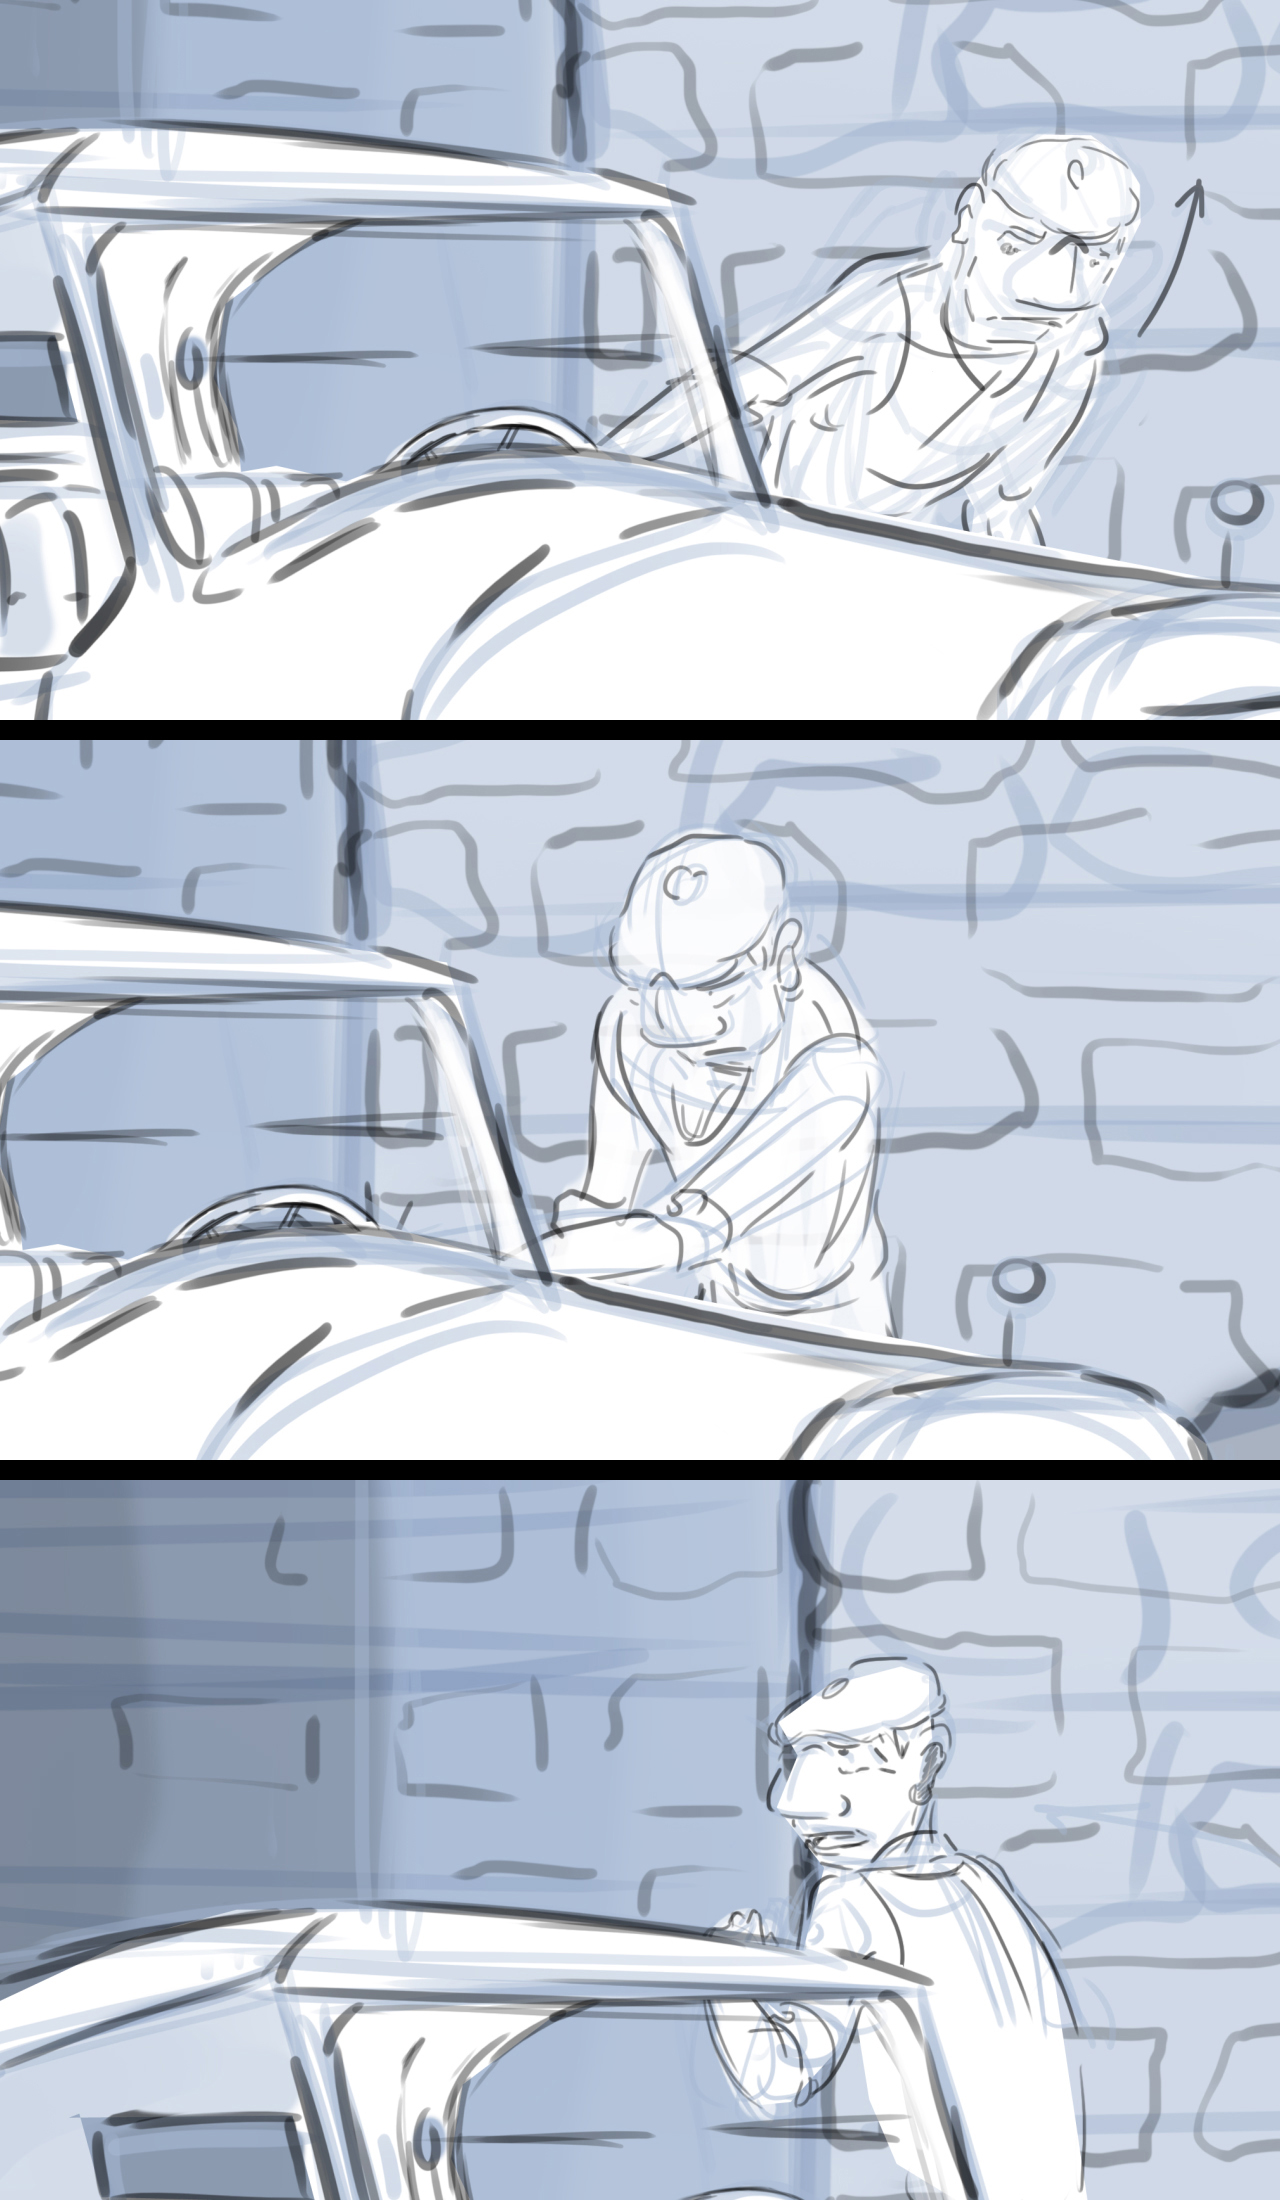 Storyboard sequence from an animated film. Sequence shows man getting out of car as he talks to the woman.